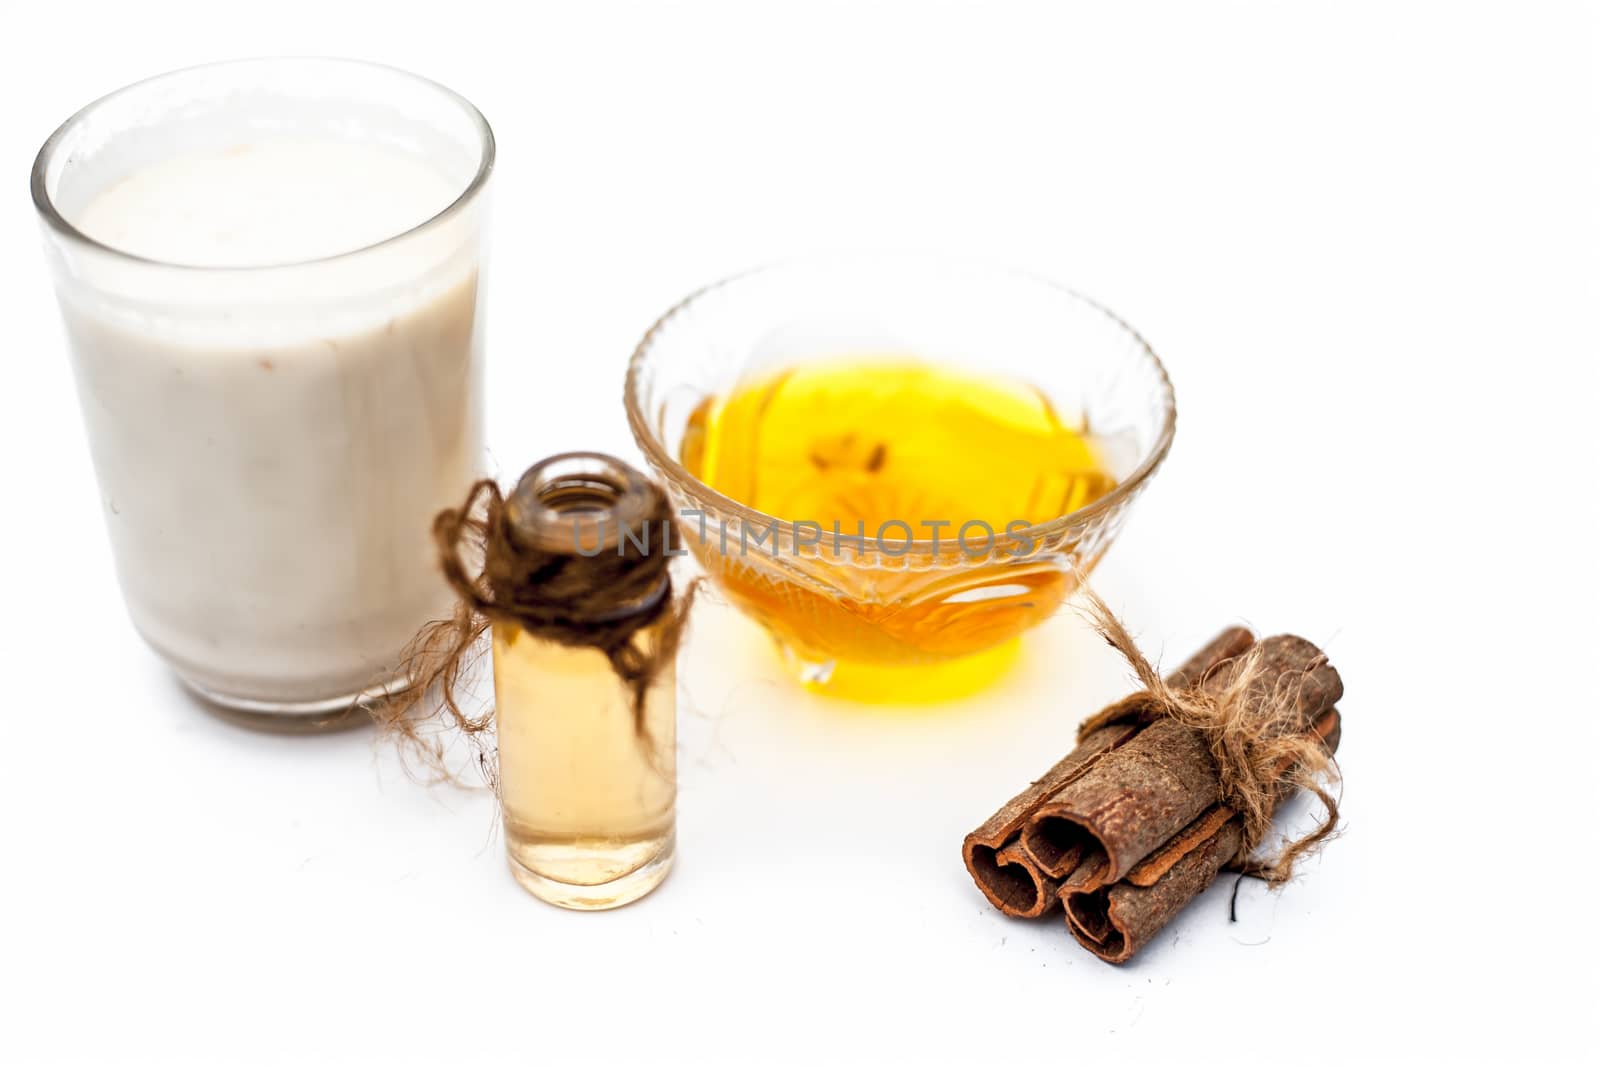 Close up of popular Indian &amp; Asian winter drink isolated on white i.e Honey milk or shahad ka dudh in a transparent glass with entire ingredients which are milk,honey, and dry fruits.